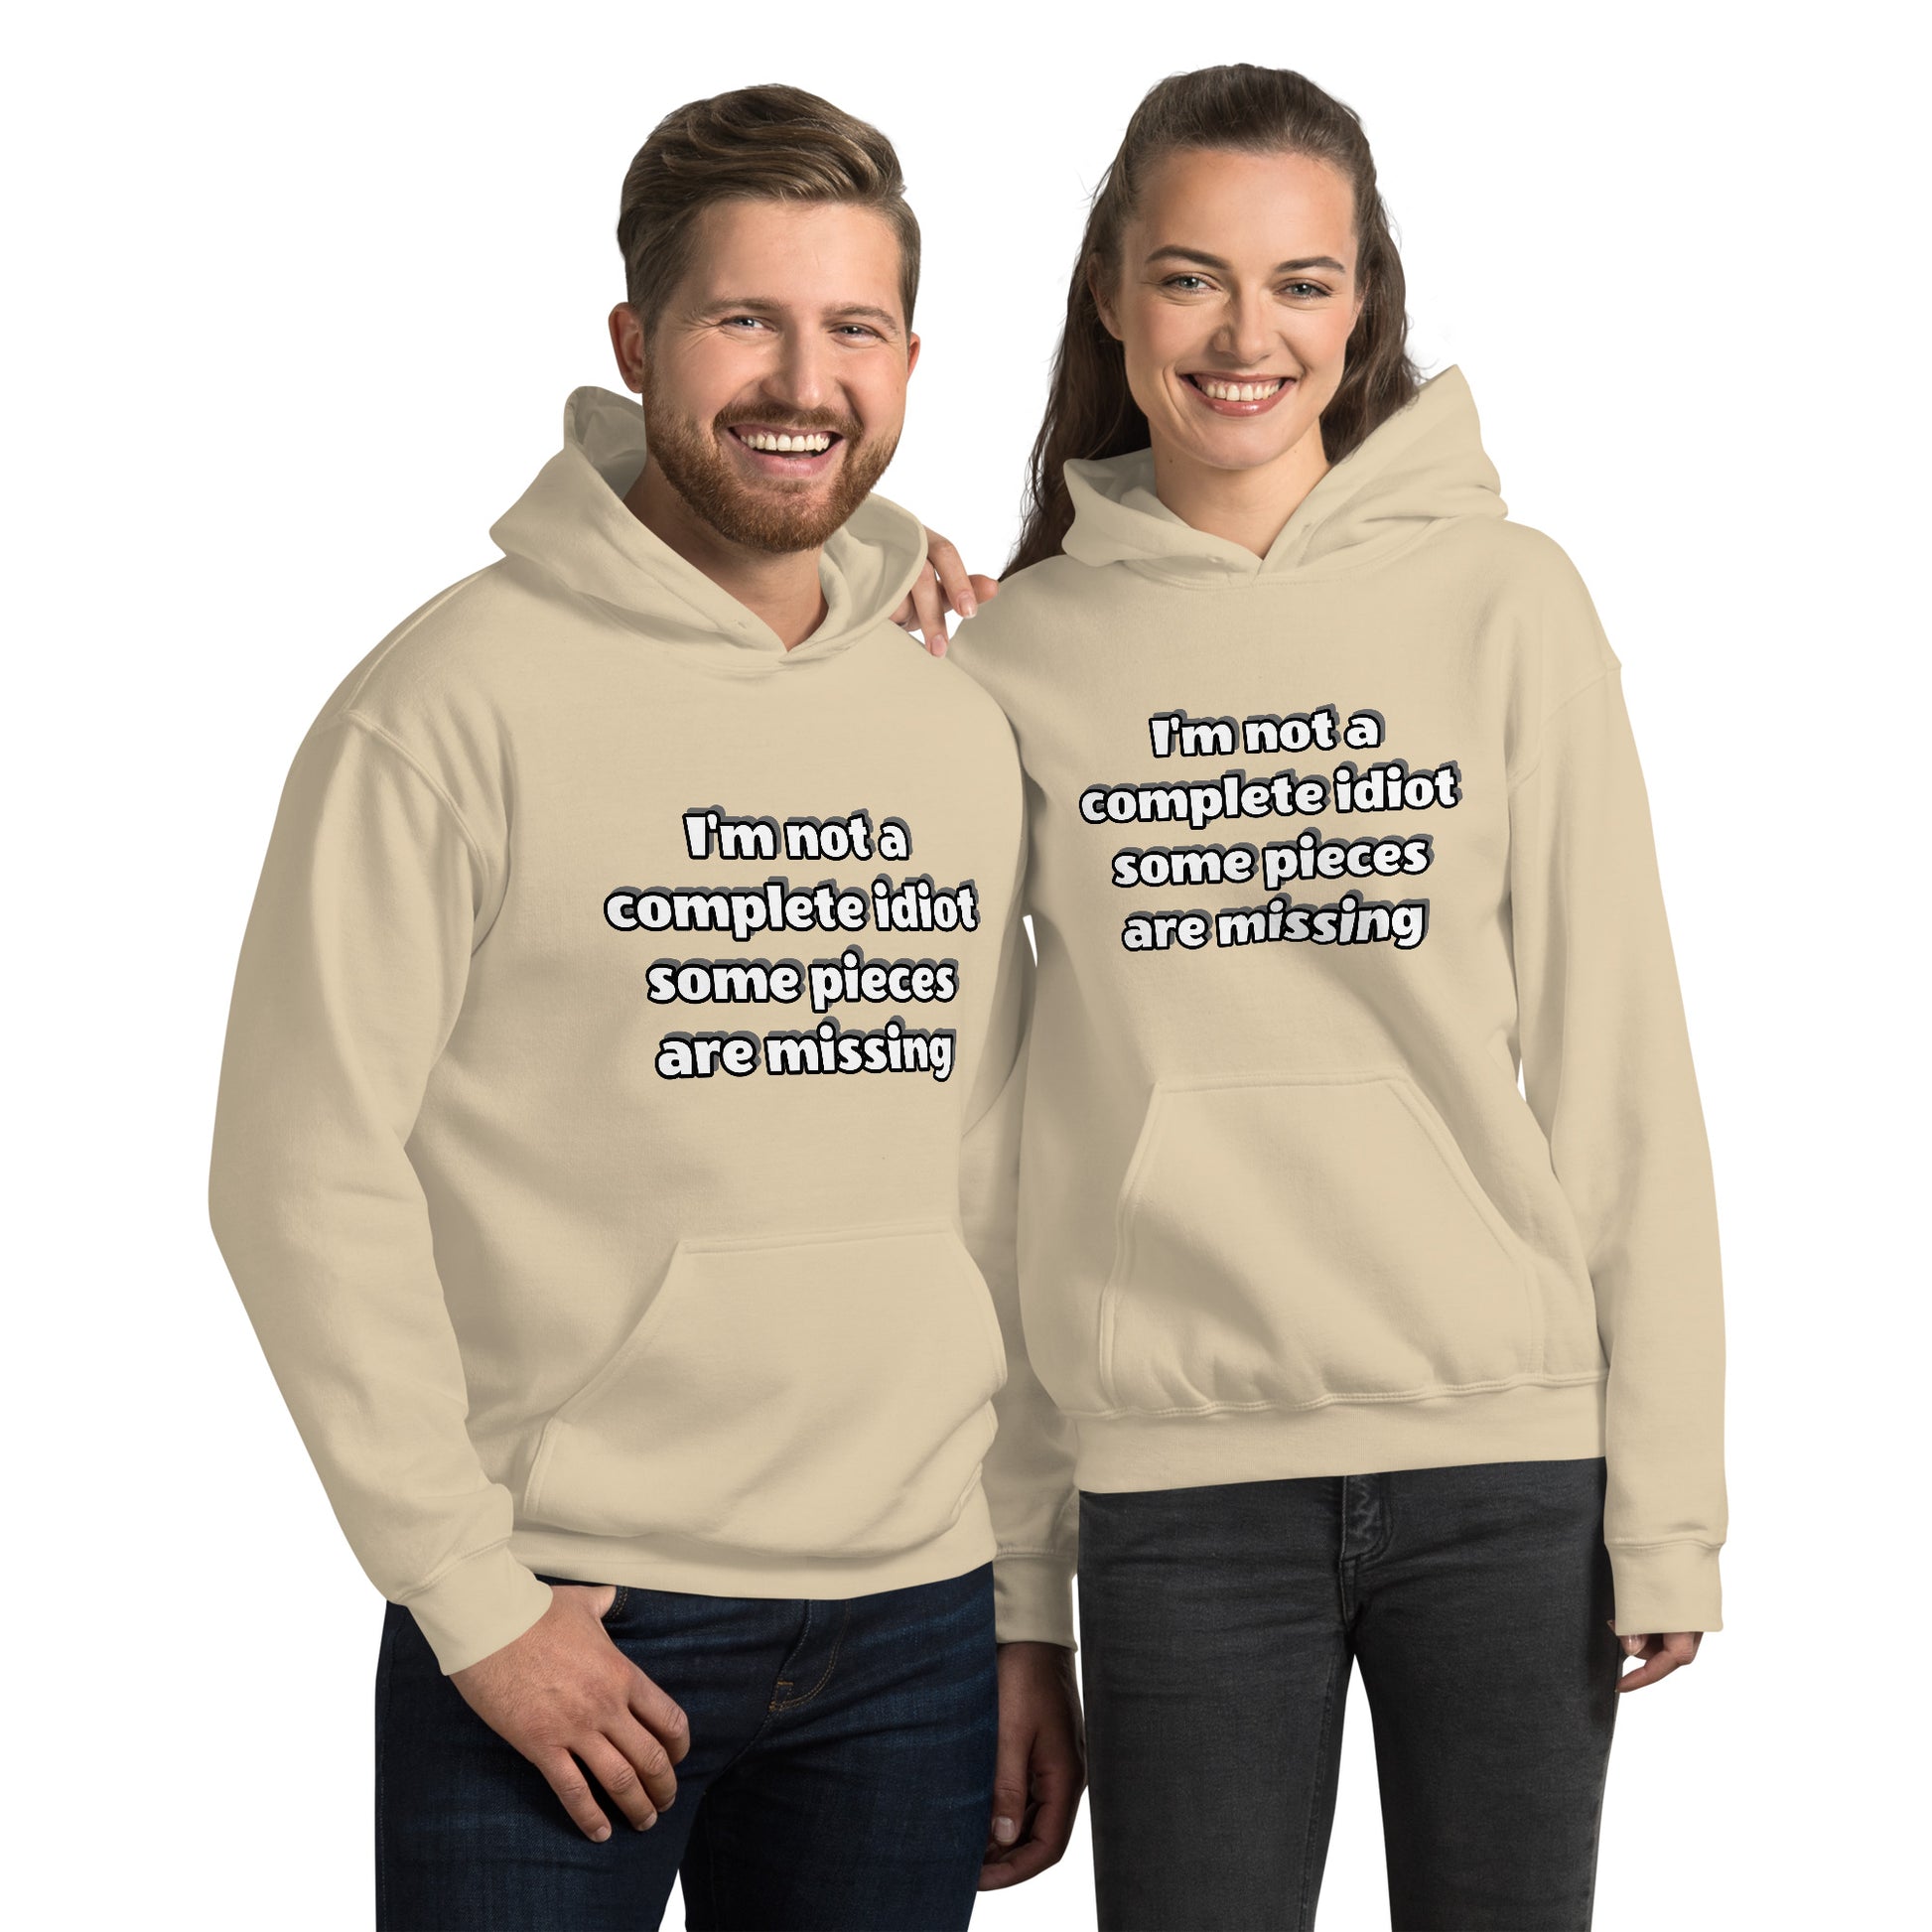 Men and women with sand hoodie with text “I’m not a complete idiot, some pieces are missing”